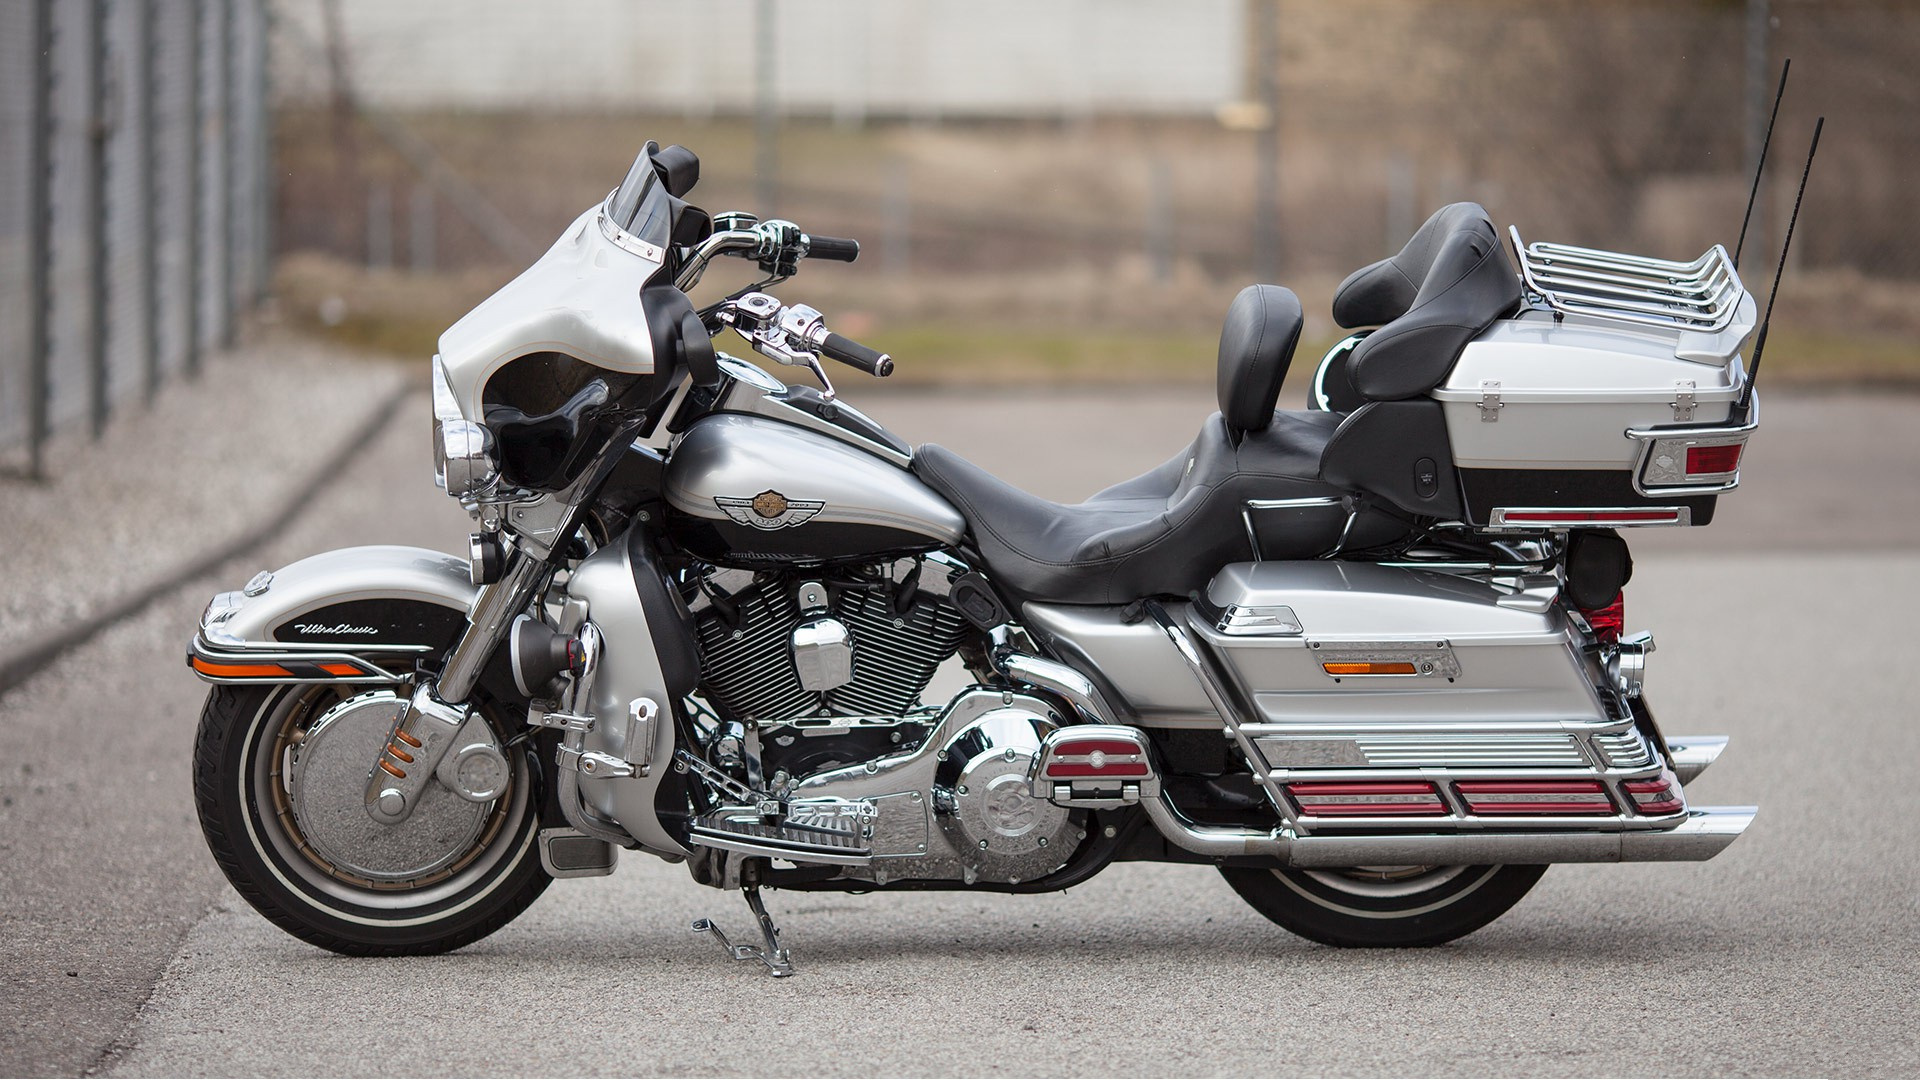 Harley-Davidson Electra Glide Revival, Ultra classic HD, Iconic cruiser, Ride in style, 1920x1080 Full HD Desktop